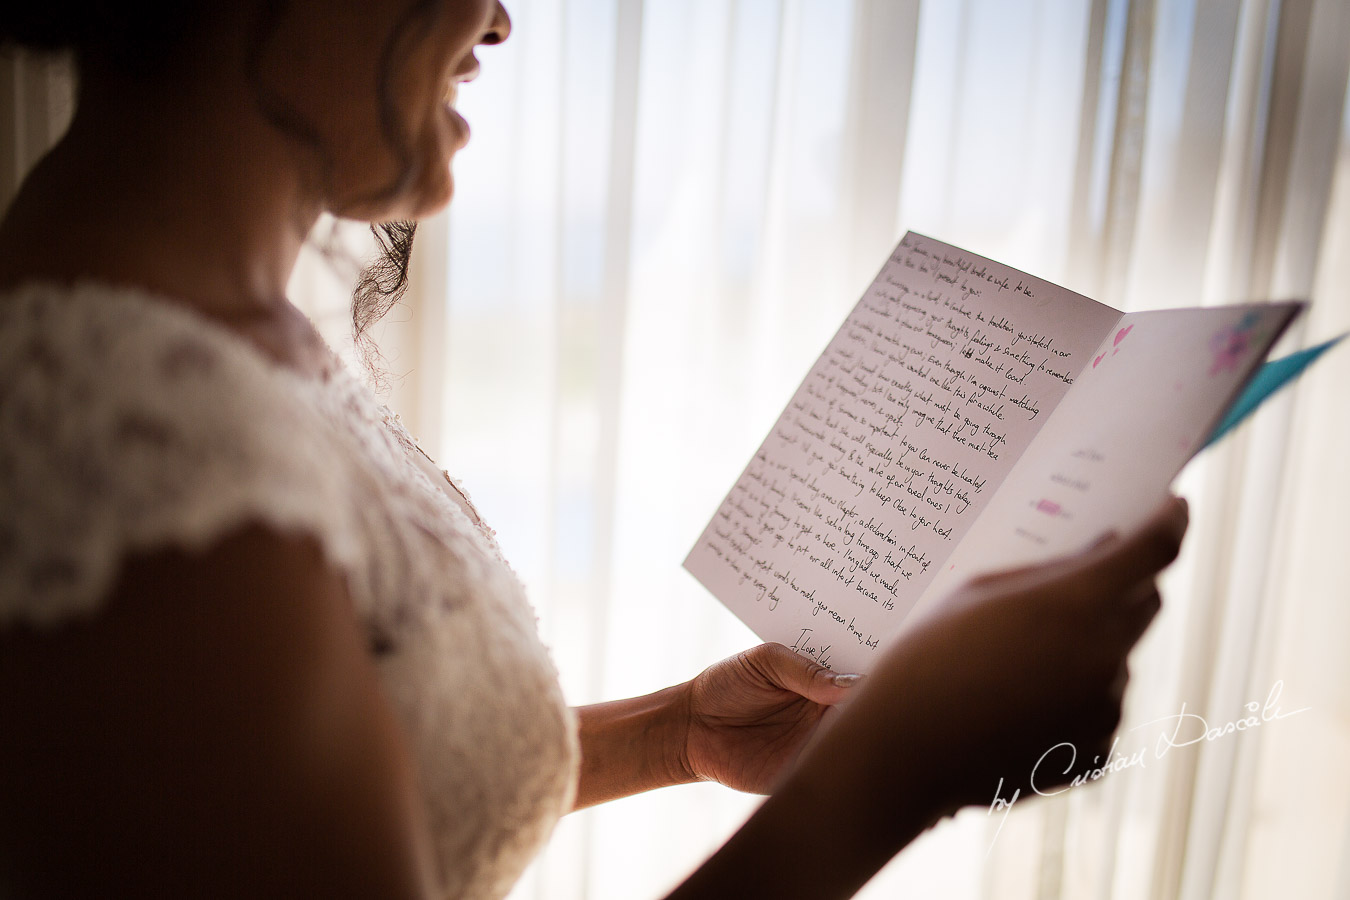 Genuine moments when the bride is reading her letter from the groom captured at a wedding at Minthis Hills in Cyprus, by Cristian Dascalu.